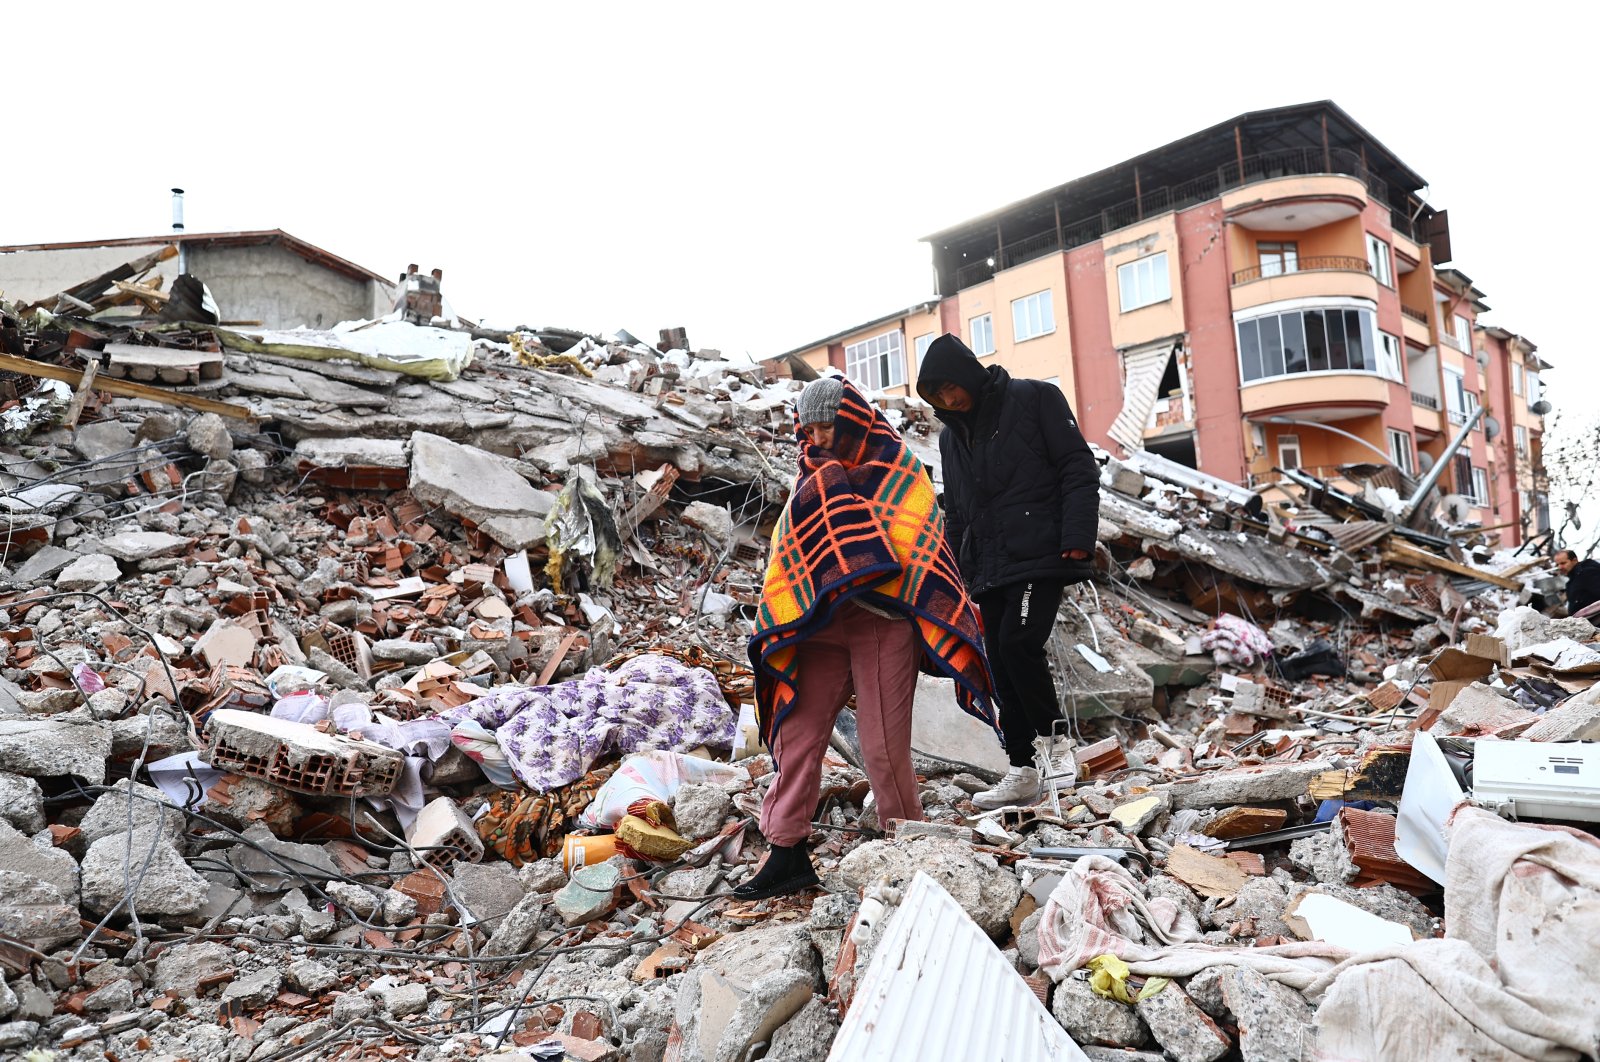 People walk over the rubble of a collapsed building in the aftermath of a major earthquake in the Elbistan district of Kahramanmaraş, Türkiye, Feb. 8, 2023. (EPA Photo)